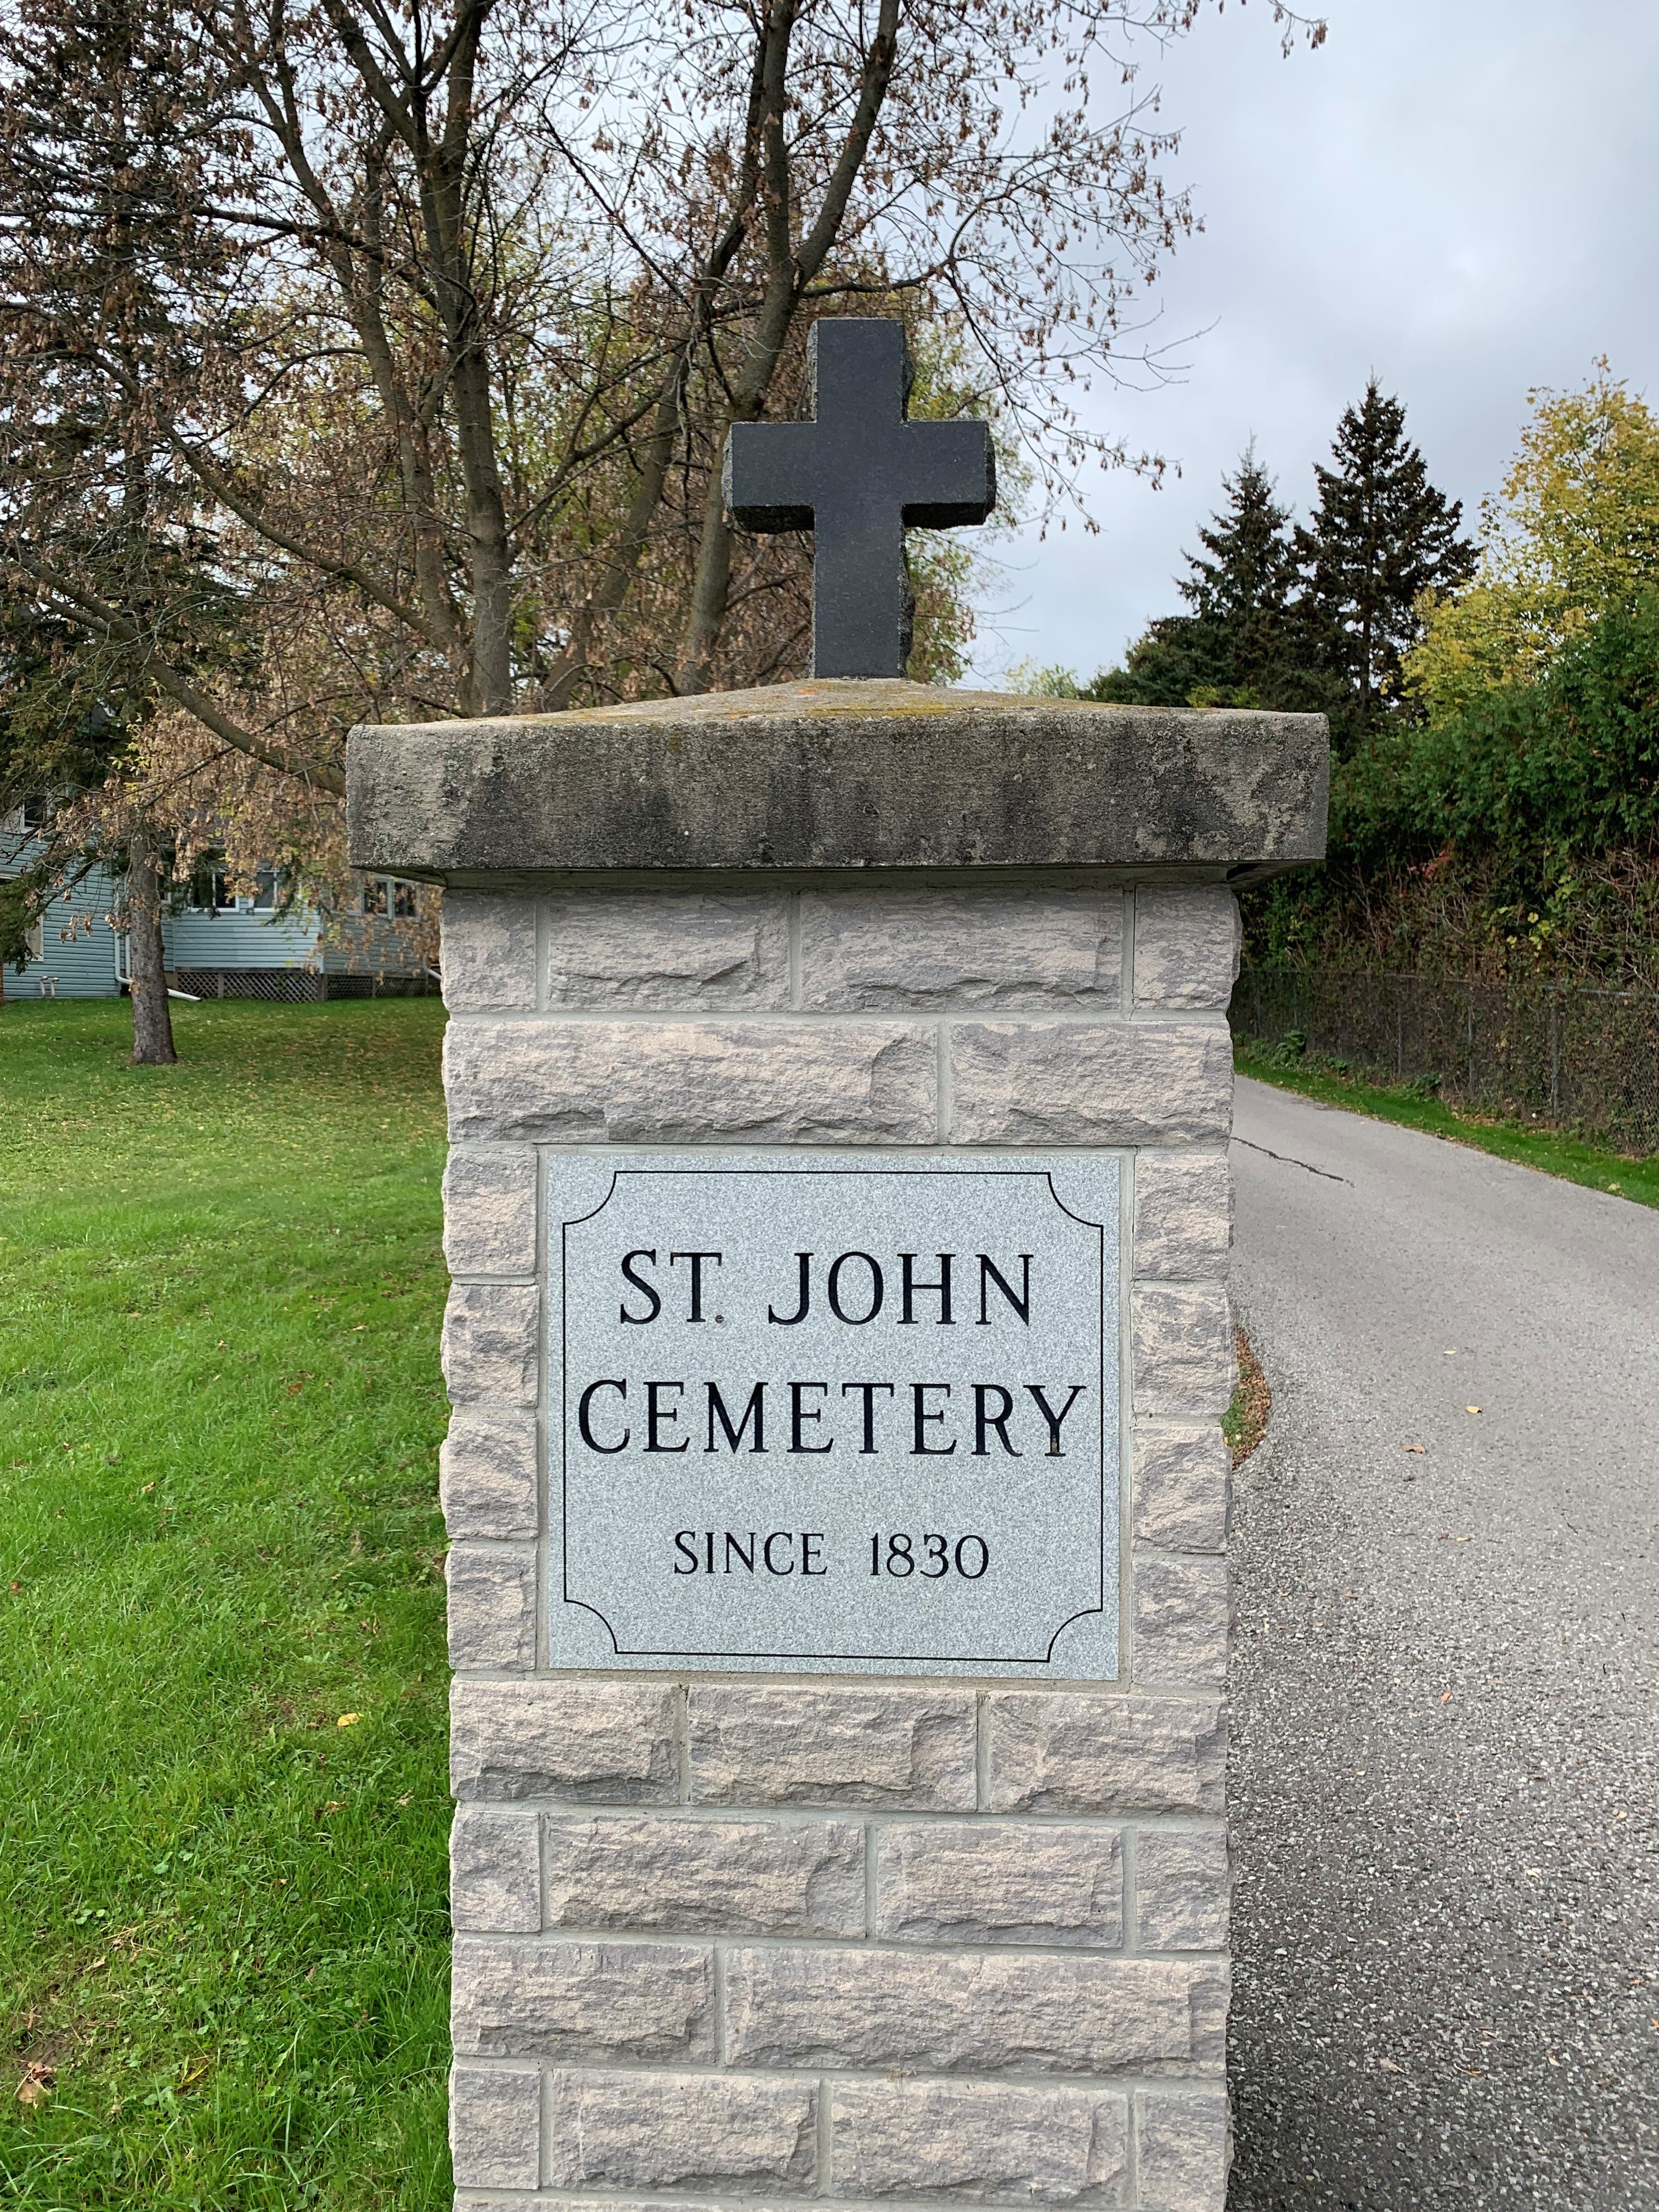 A picture of one a column inscribed with the Cemetery name. The inscription reads: St. John Cemetery, since 1830.